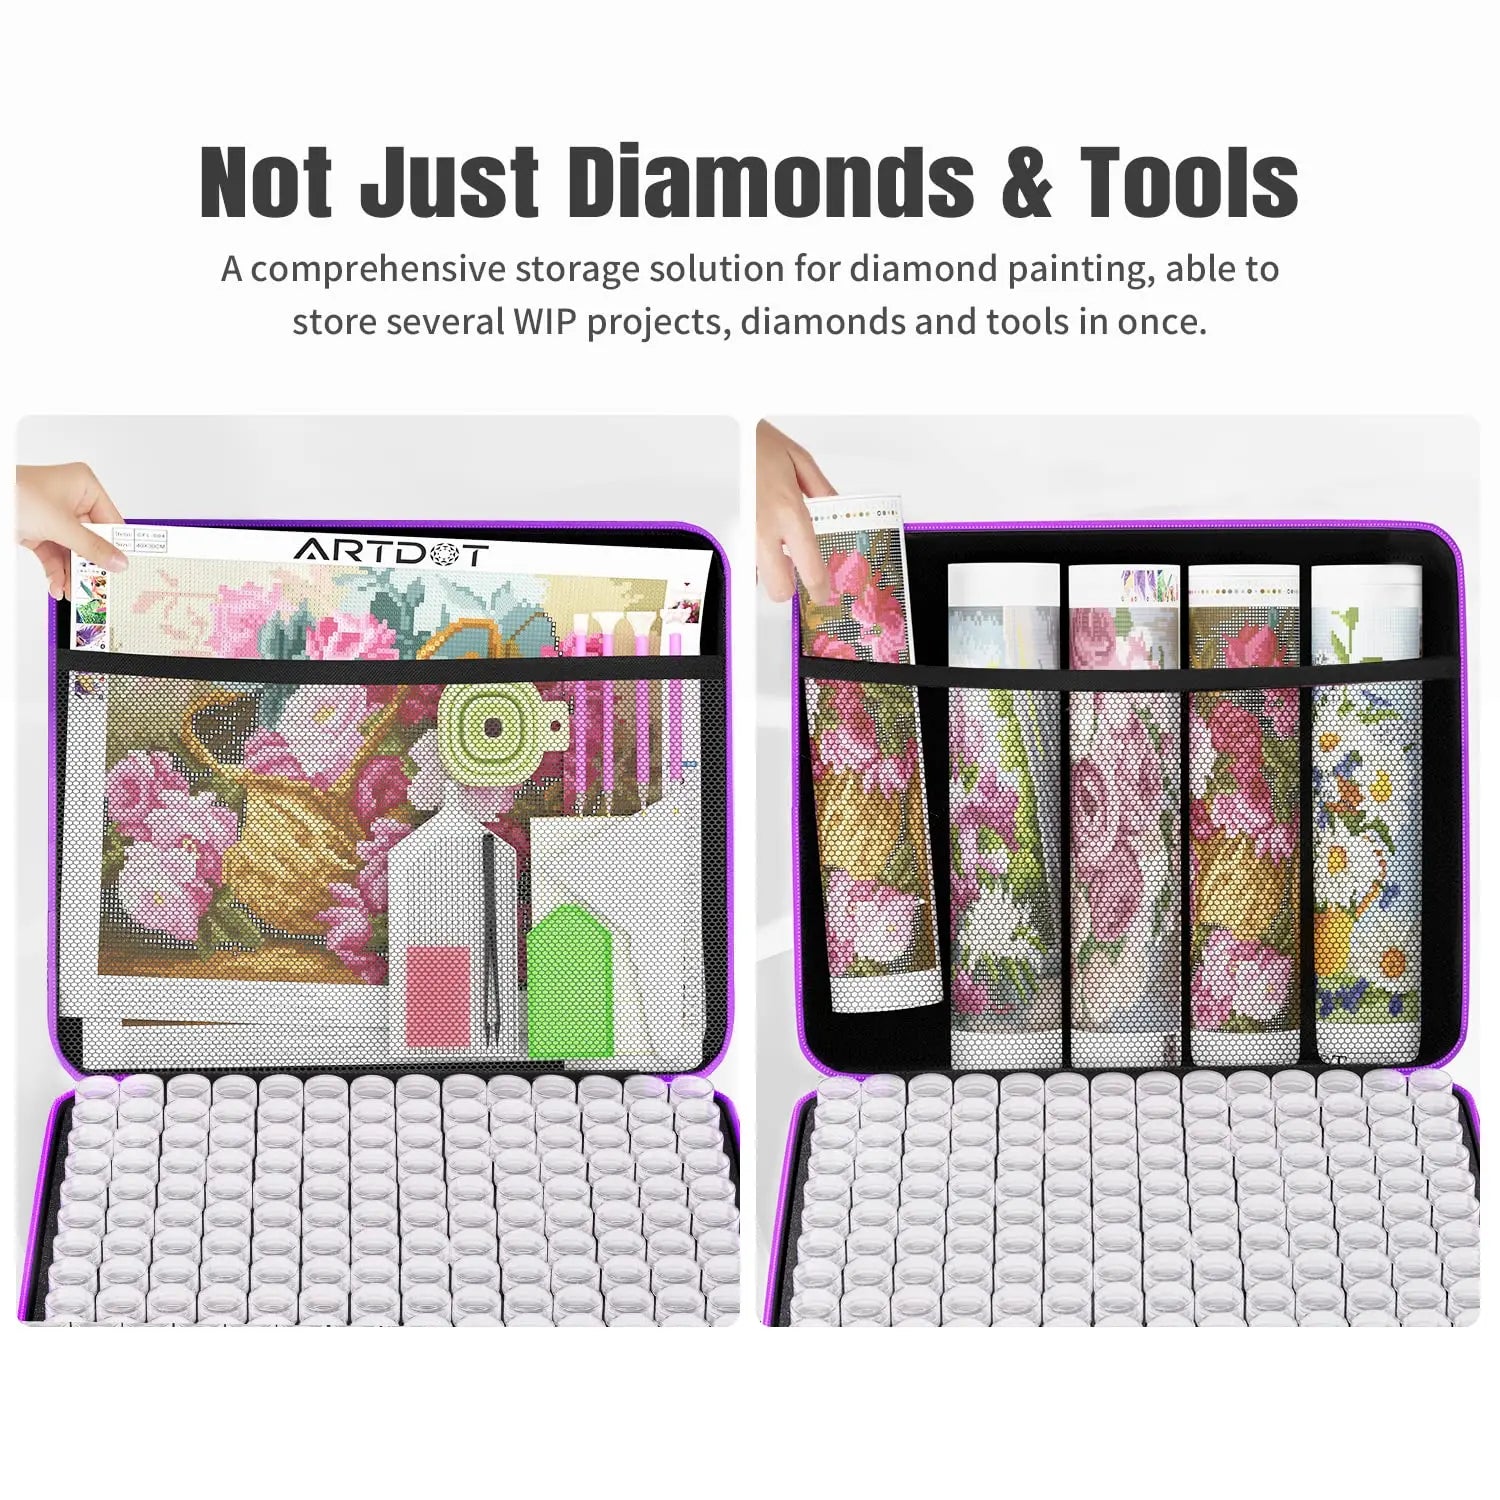 Foldable Stand for Diamond Painting - Diy Craft Store